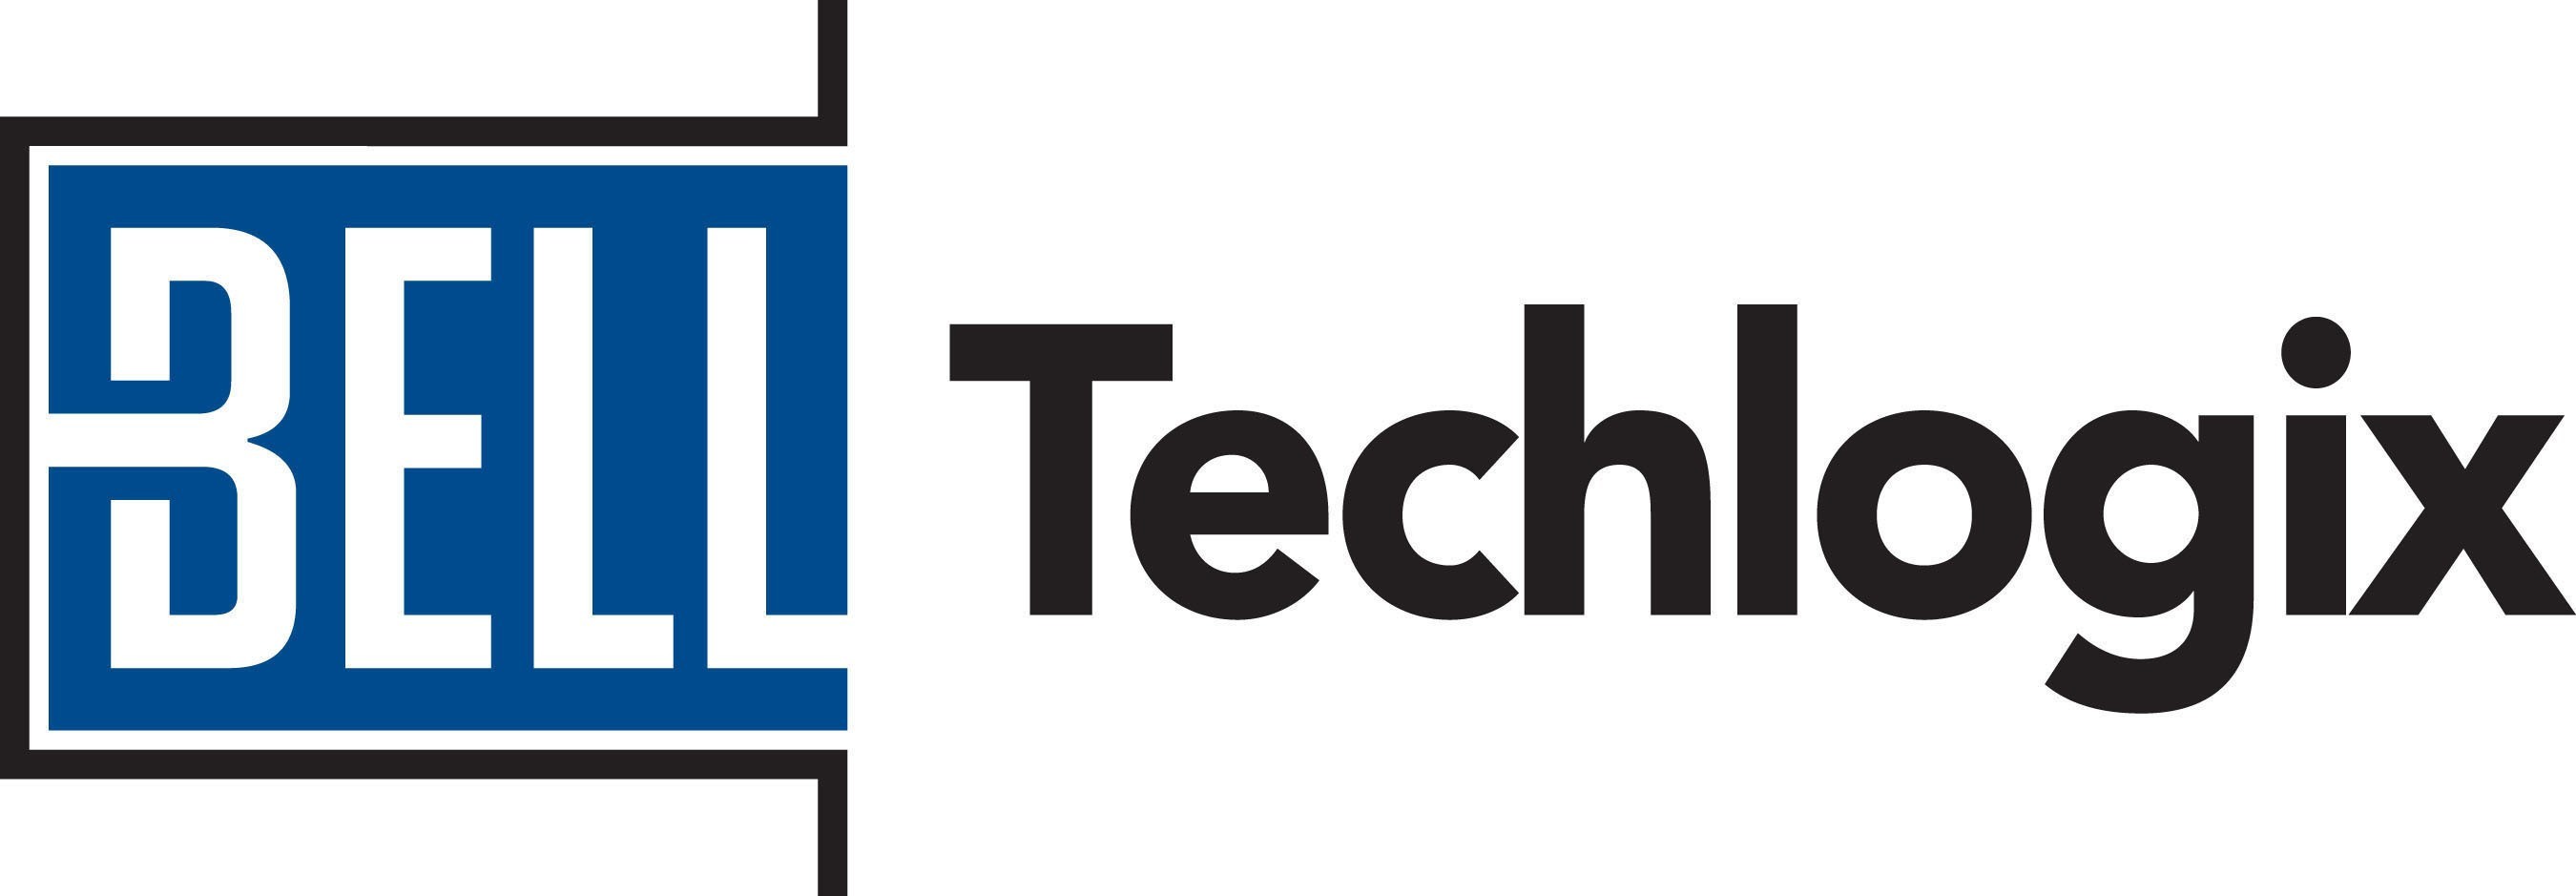 Bell Techlogix - information technology managed services and solutions. (PRNewsFoto/Bell Techlogix) (PRNewsFoto/)